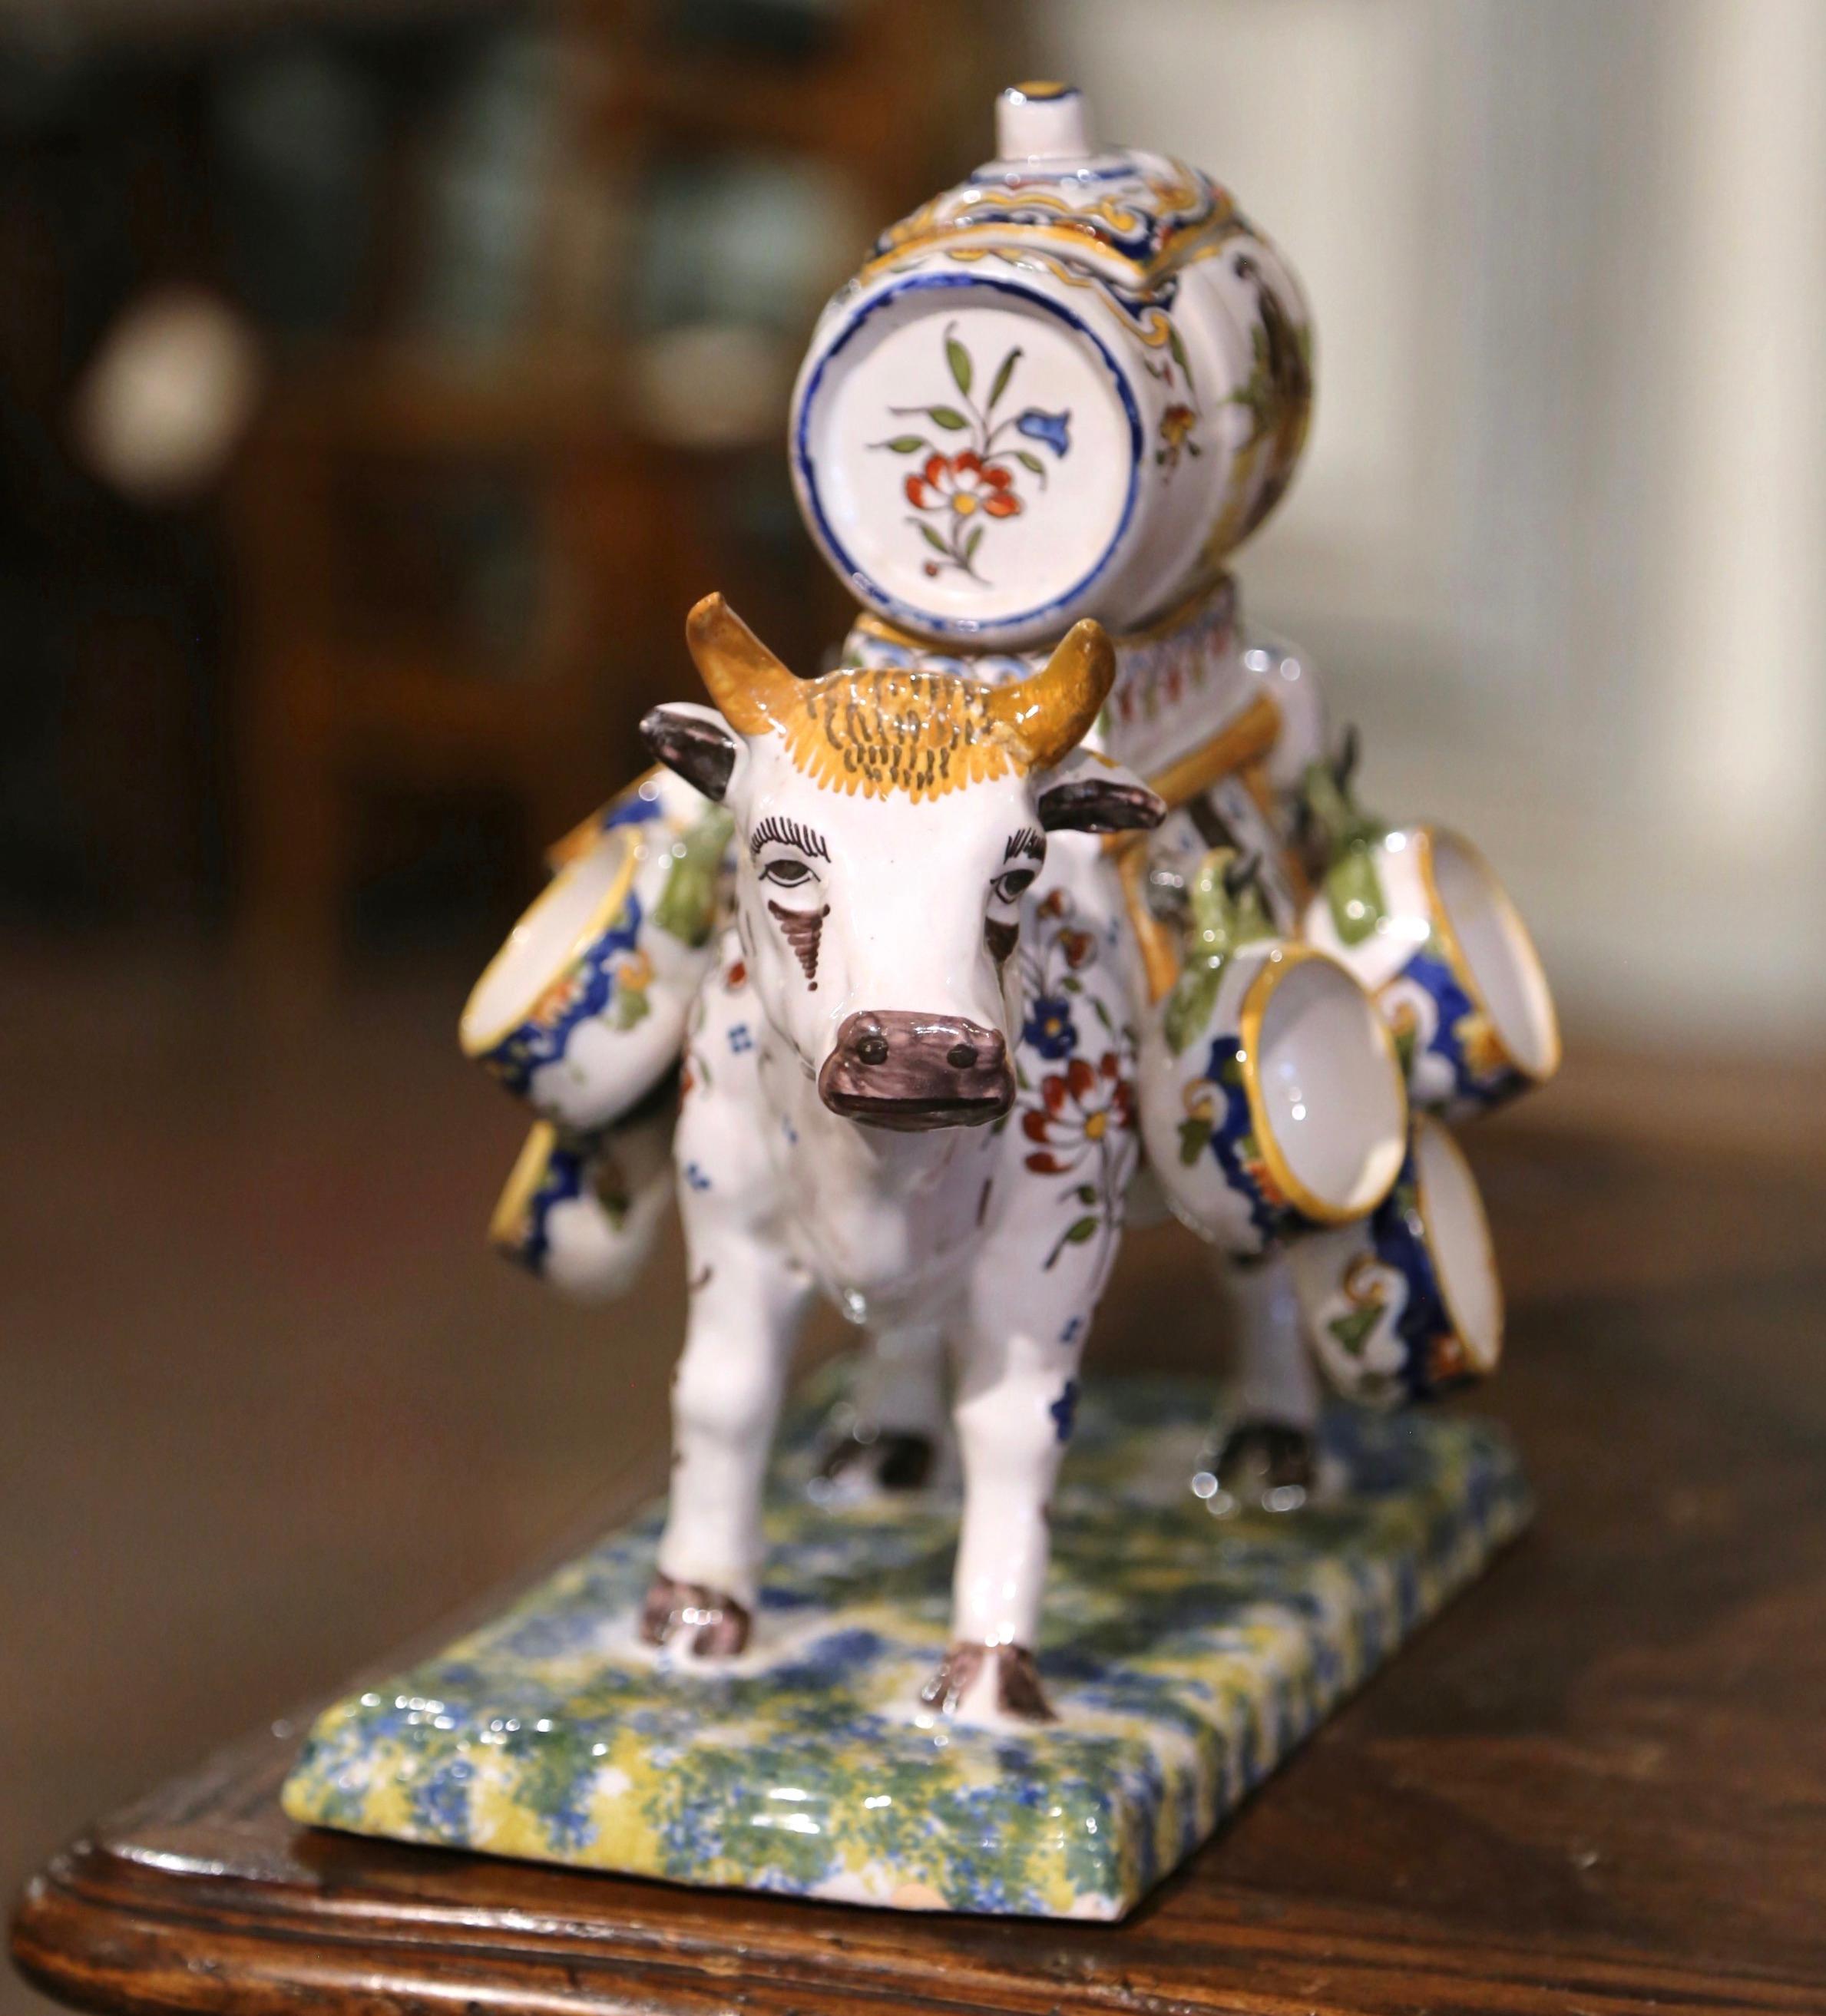 Decorate a bar with this colorful, antique Majolica sculpture composition! Created in Normandy, France circa 1960, the ceramic jardinière features a cow sculpture carrying a Calvados barrel with its original metal faucet and its removable top; it is